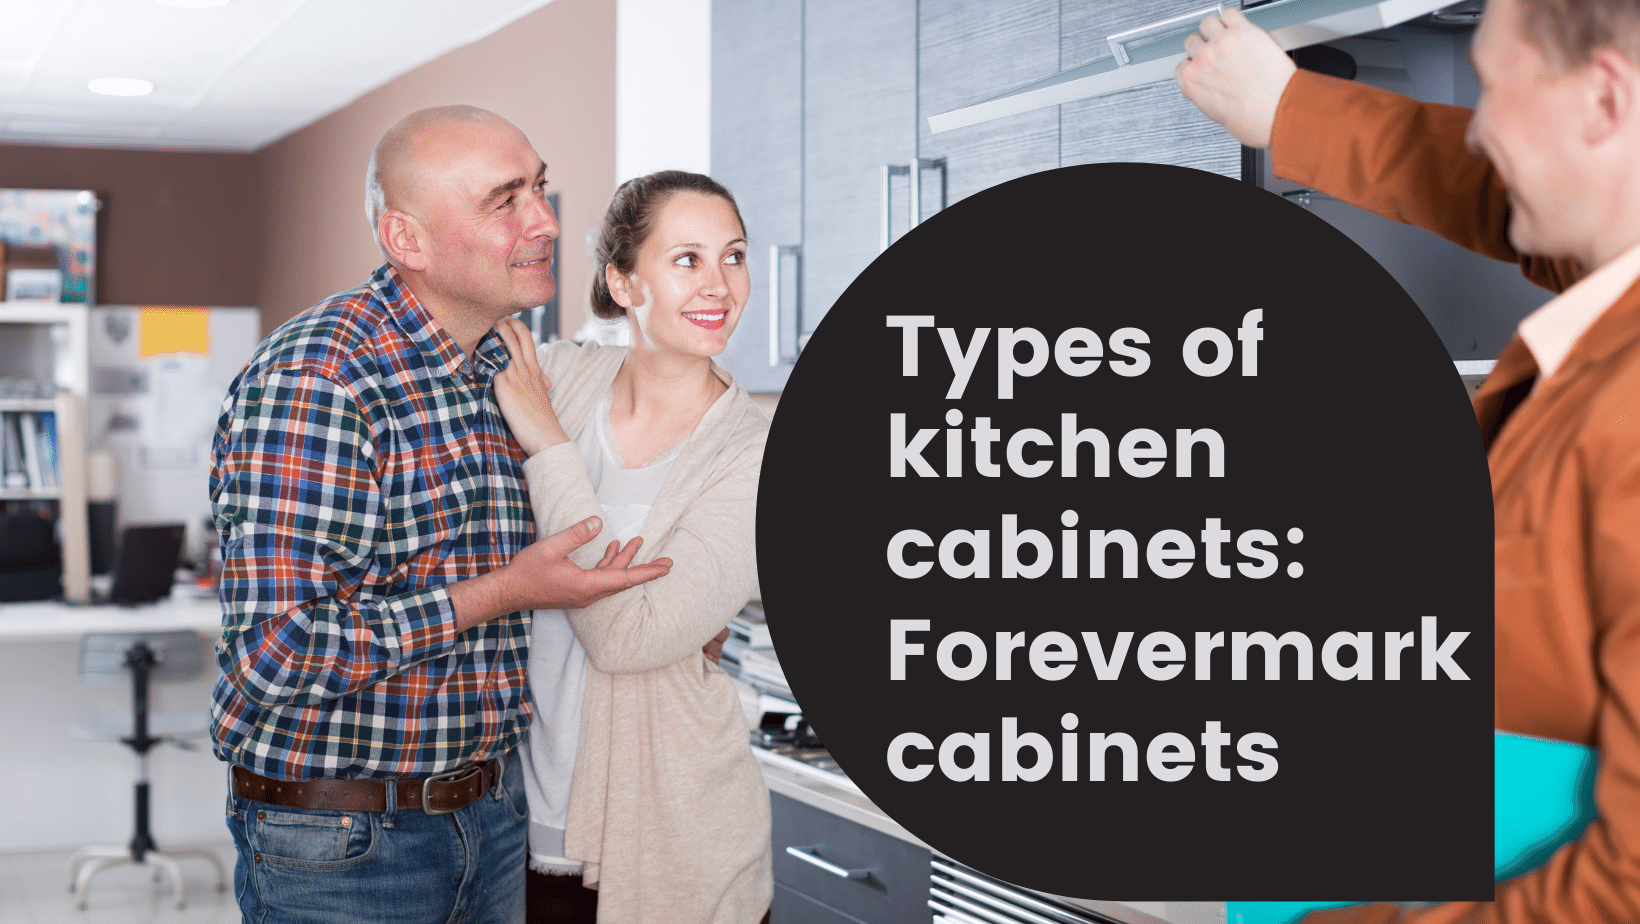 Types of kitchen cabinets forevermark cabinets